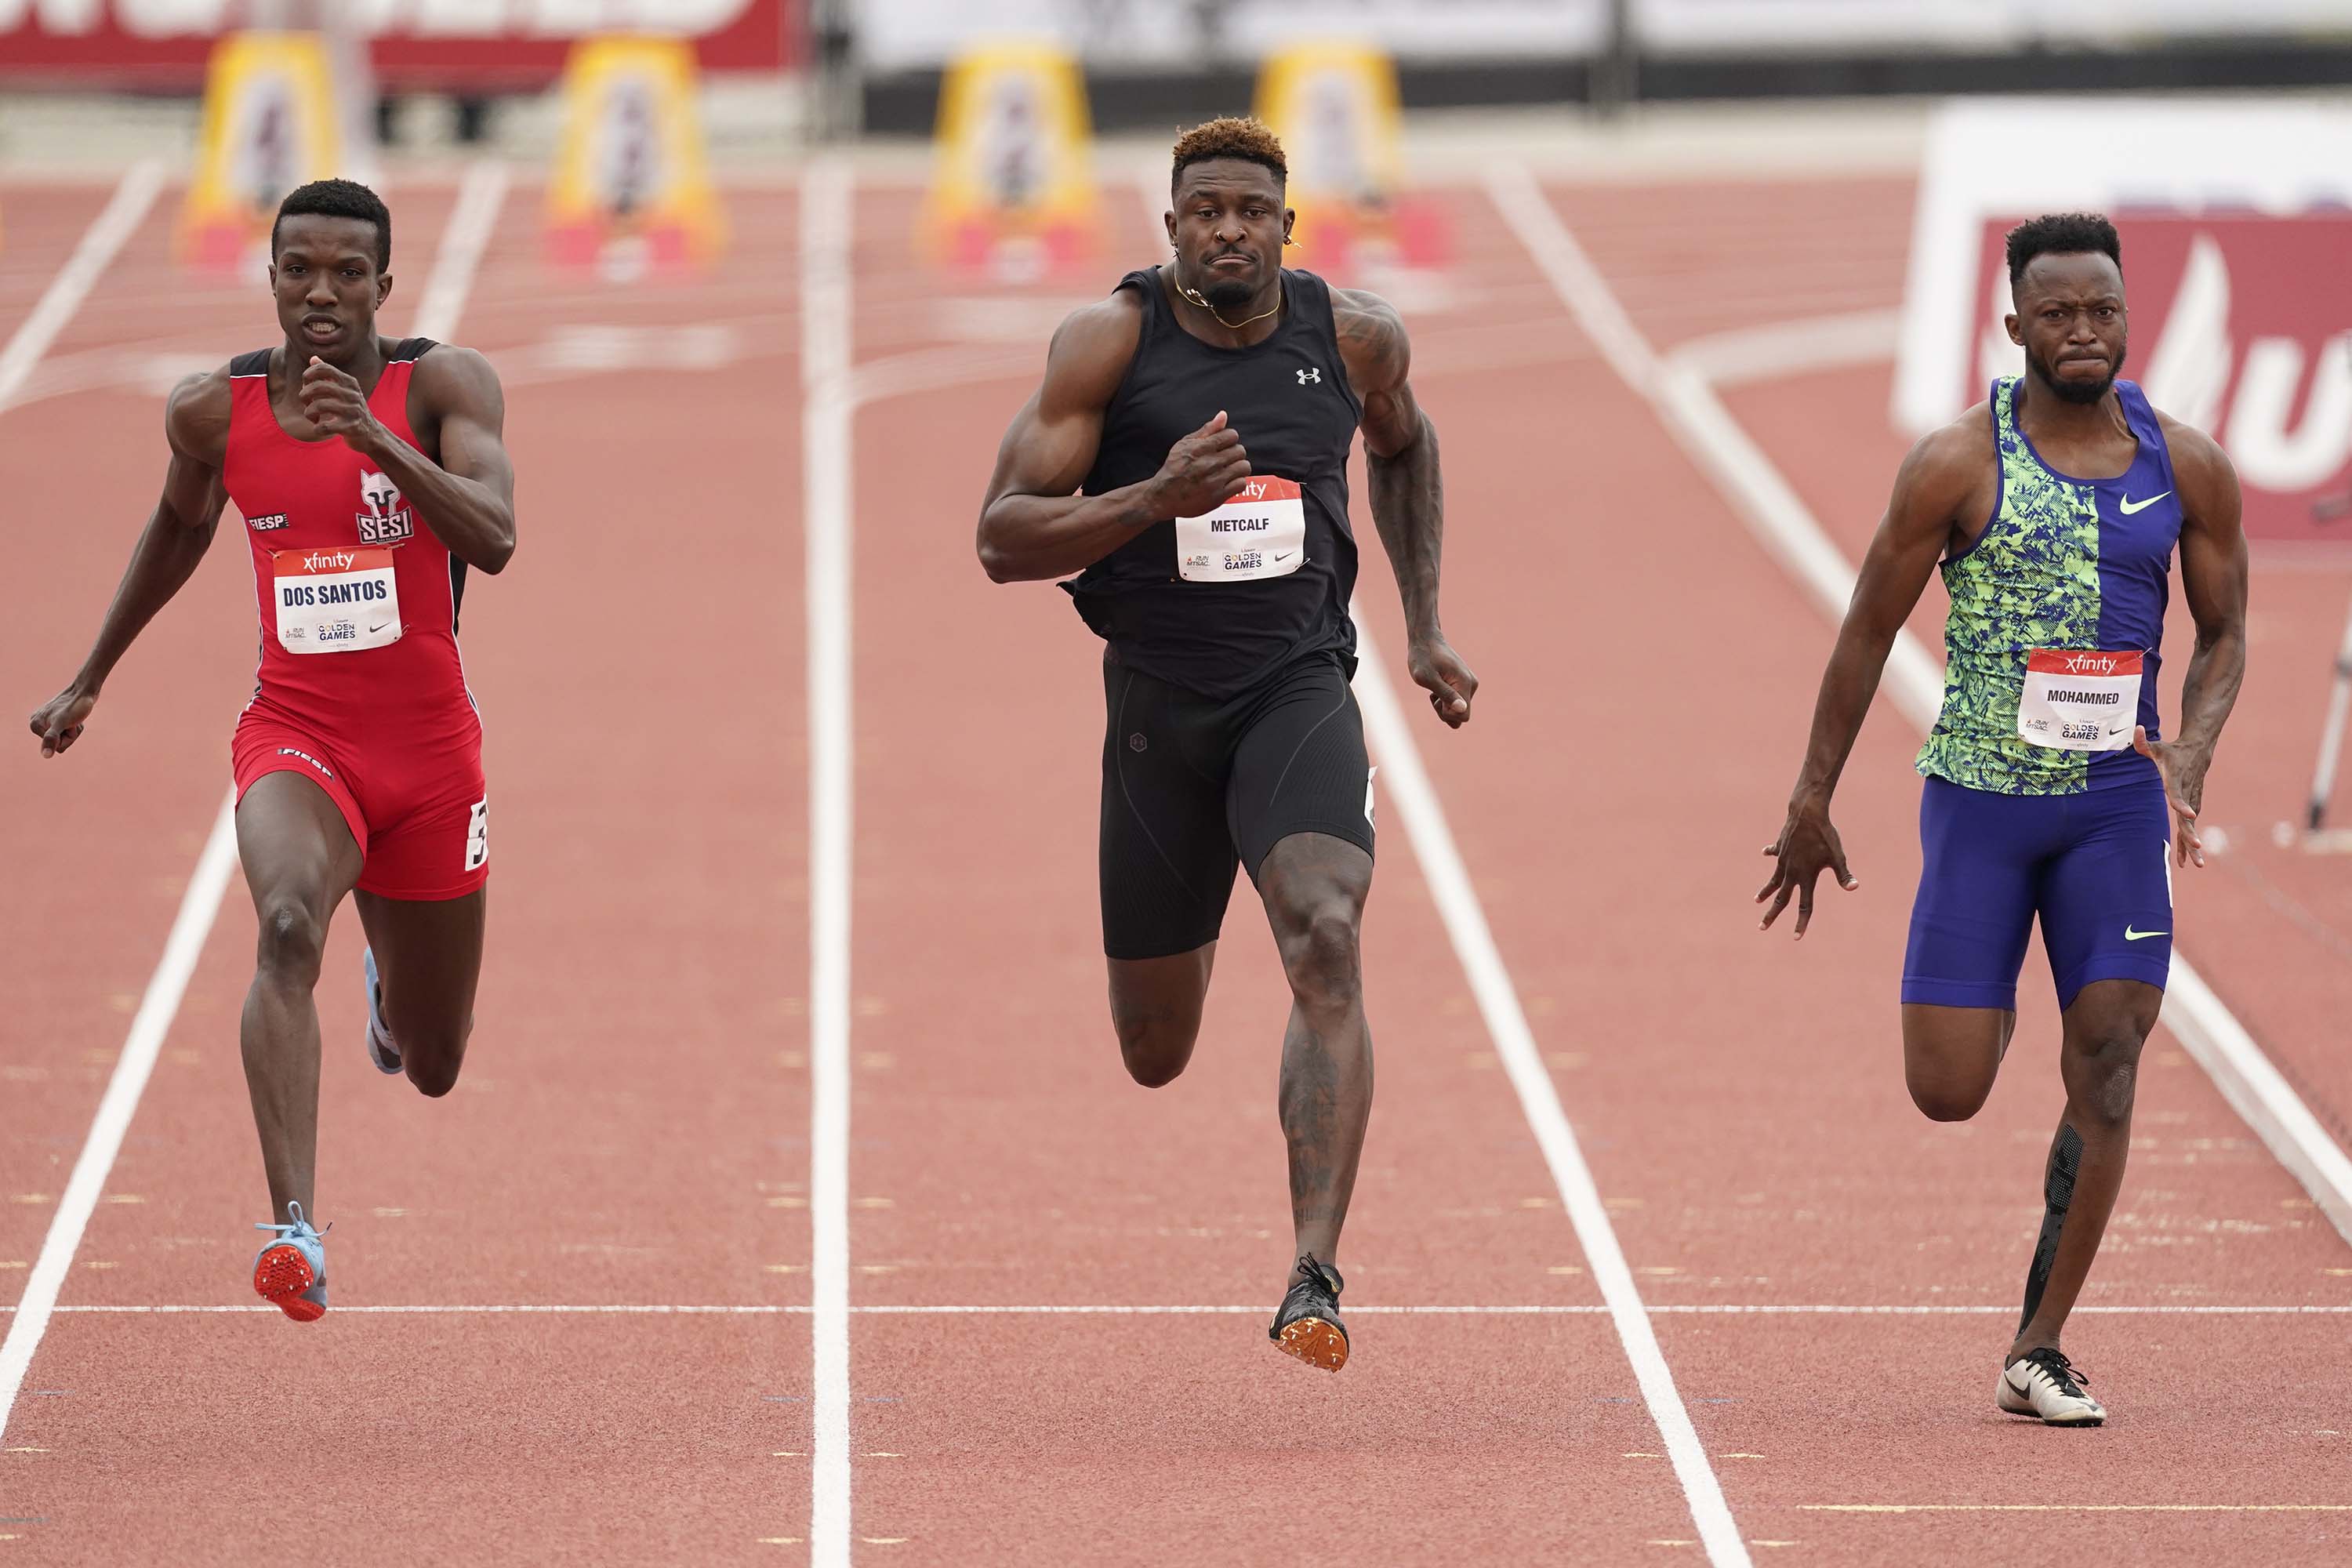 2020 Olympics: NFL star DK Metcalf runs 10.36 seconds for 100 meters, but  fails to qualify for Tokyo Games